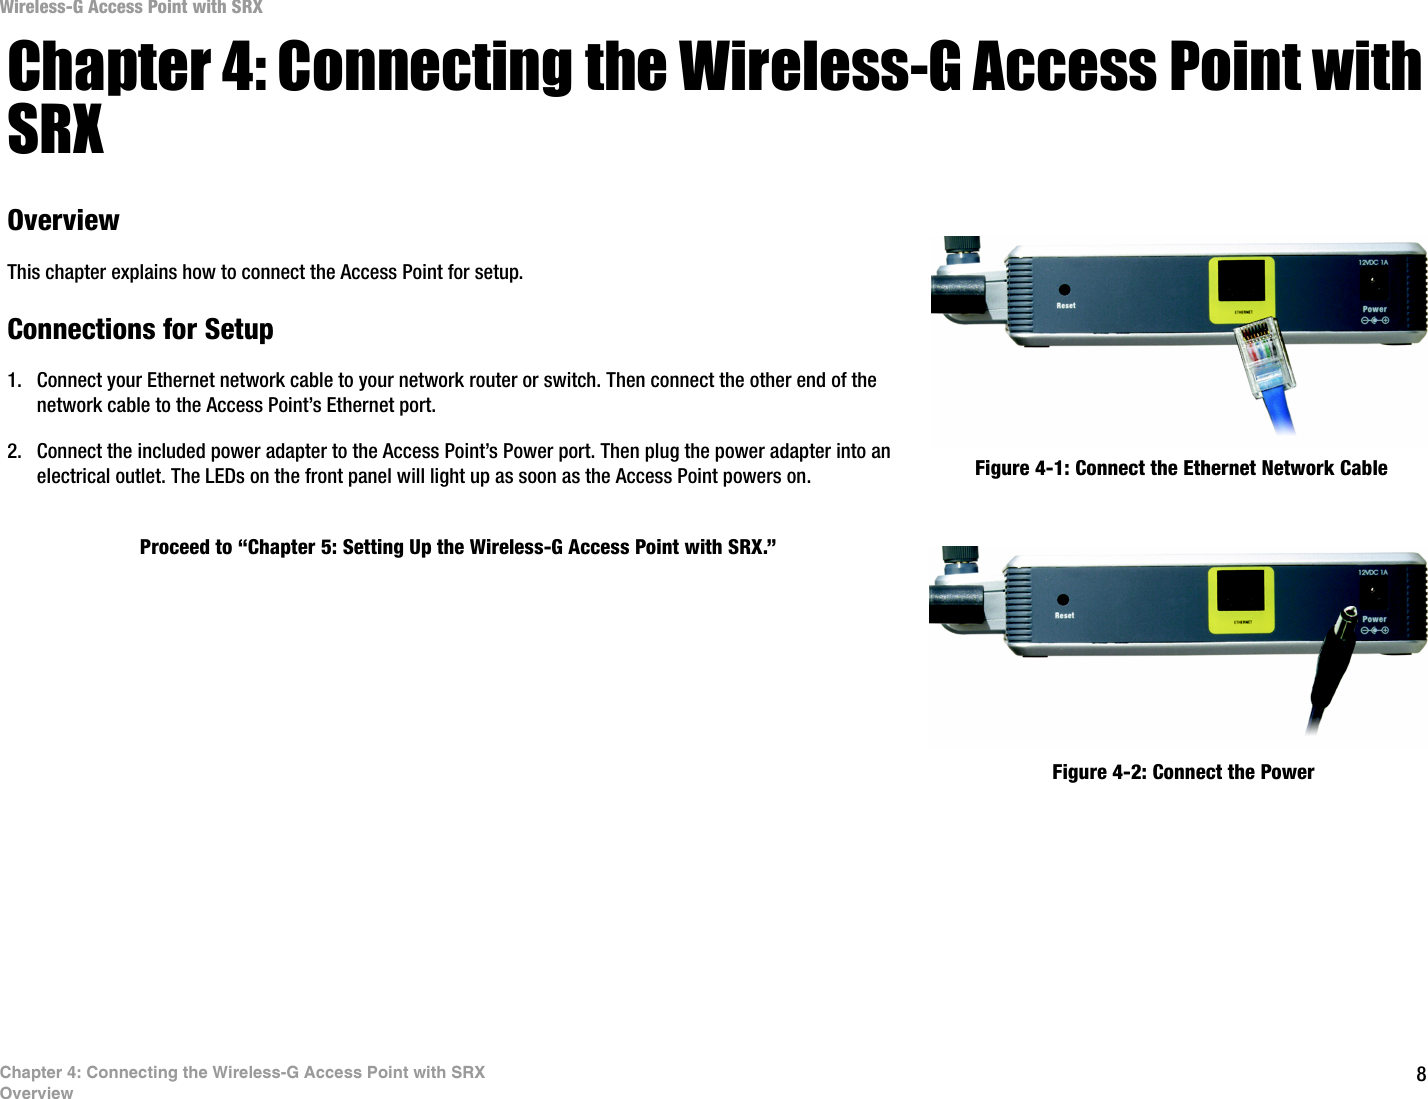 8Chapter 4: Connecting the Wireless-G Access Point with SRXOverviewWireless-G Access Point with SRXChapter 4: Connecting the Wireless-G Access Point with SRXOverviewThis chapter explains how to connect the Access Point for setup.Connections for Setup1. Connect your Ethernet network cable to your network router or switch. Then connect the other end of the network cable to the Access Point’s Ethernet port.2. Connect the included power adapter to the Access Point’s Power port. Then plug the power adapter into an electrical outlet. The LEDs on the front panel will light up as soon as the Access Point powers on.Proceed to “Chapter 5: Setting Up the Wireless-G Access Point with SRX.”Figure 4-1: Connect the Ethernet Network CableFigure 4-2: Connect the Power